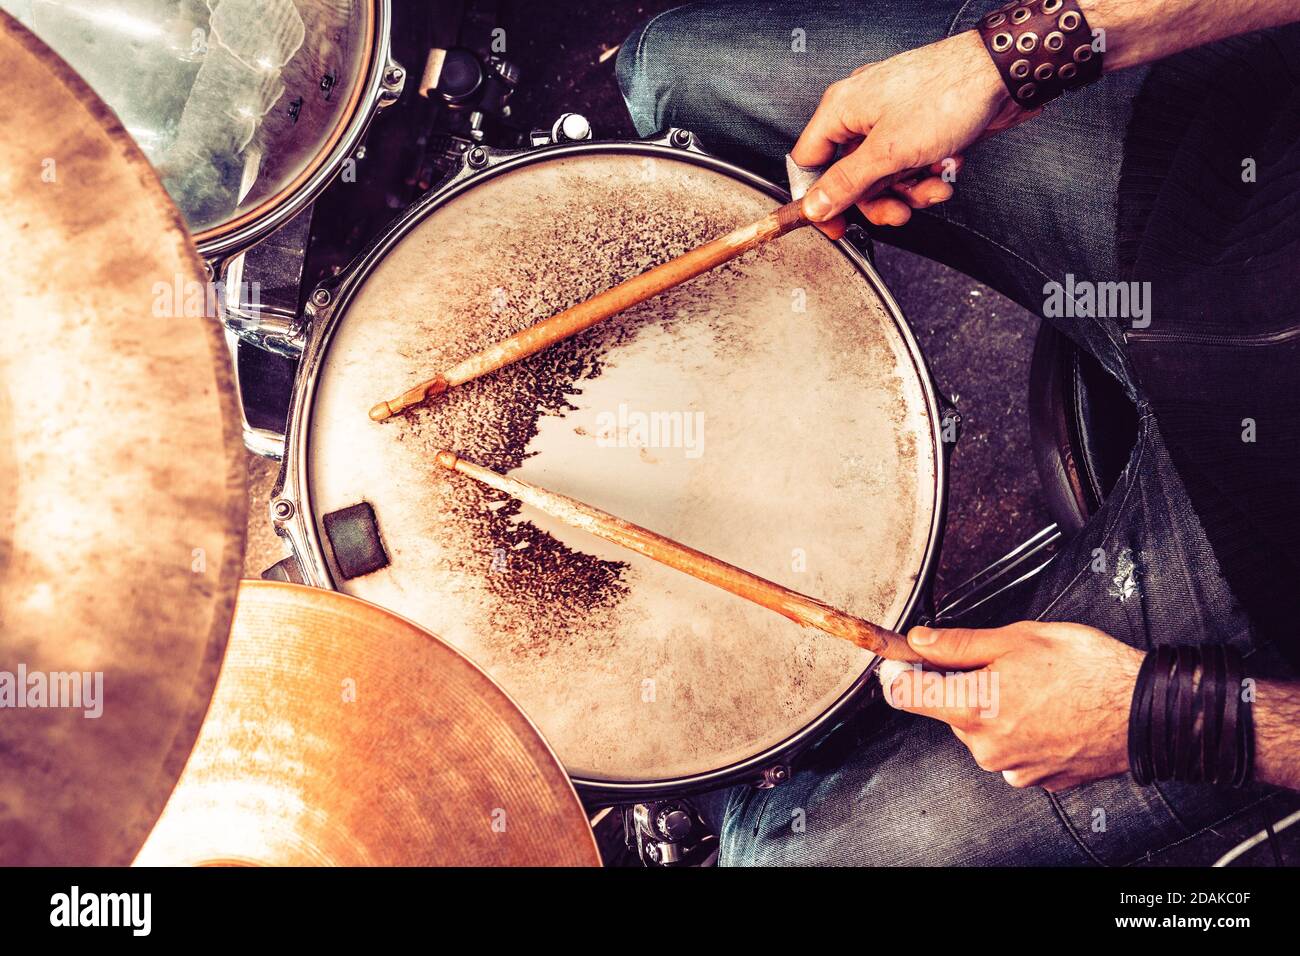 Music festival.Instrument on stage and band.Playing drum and concert concept.Live music background Stock Photo